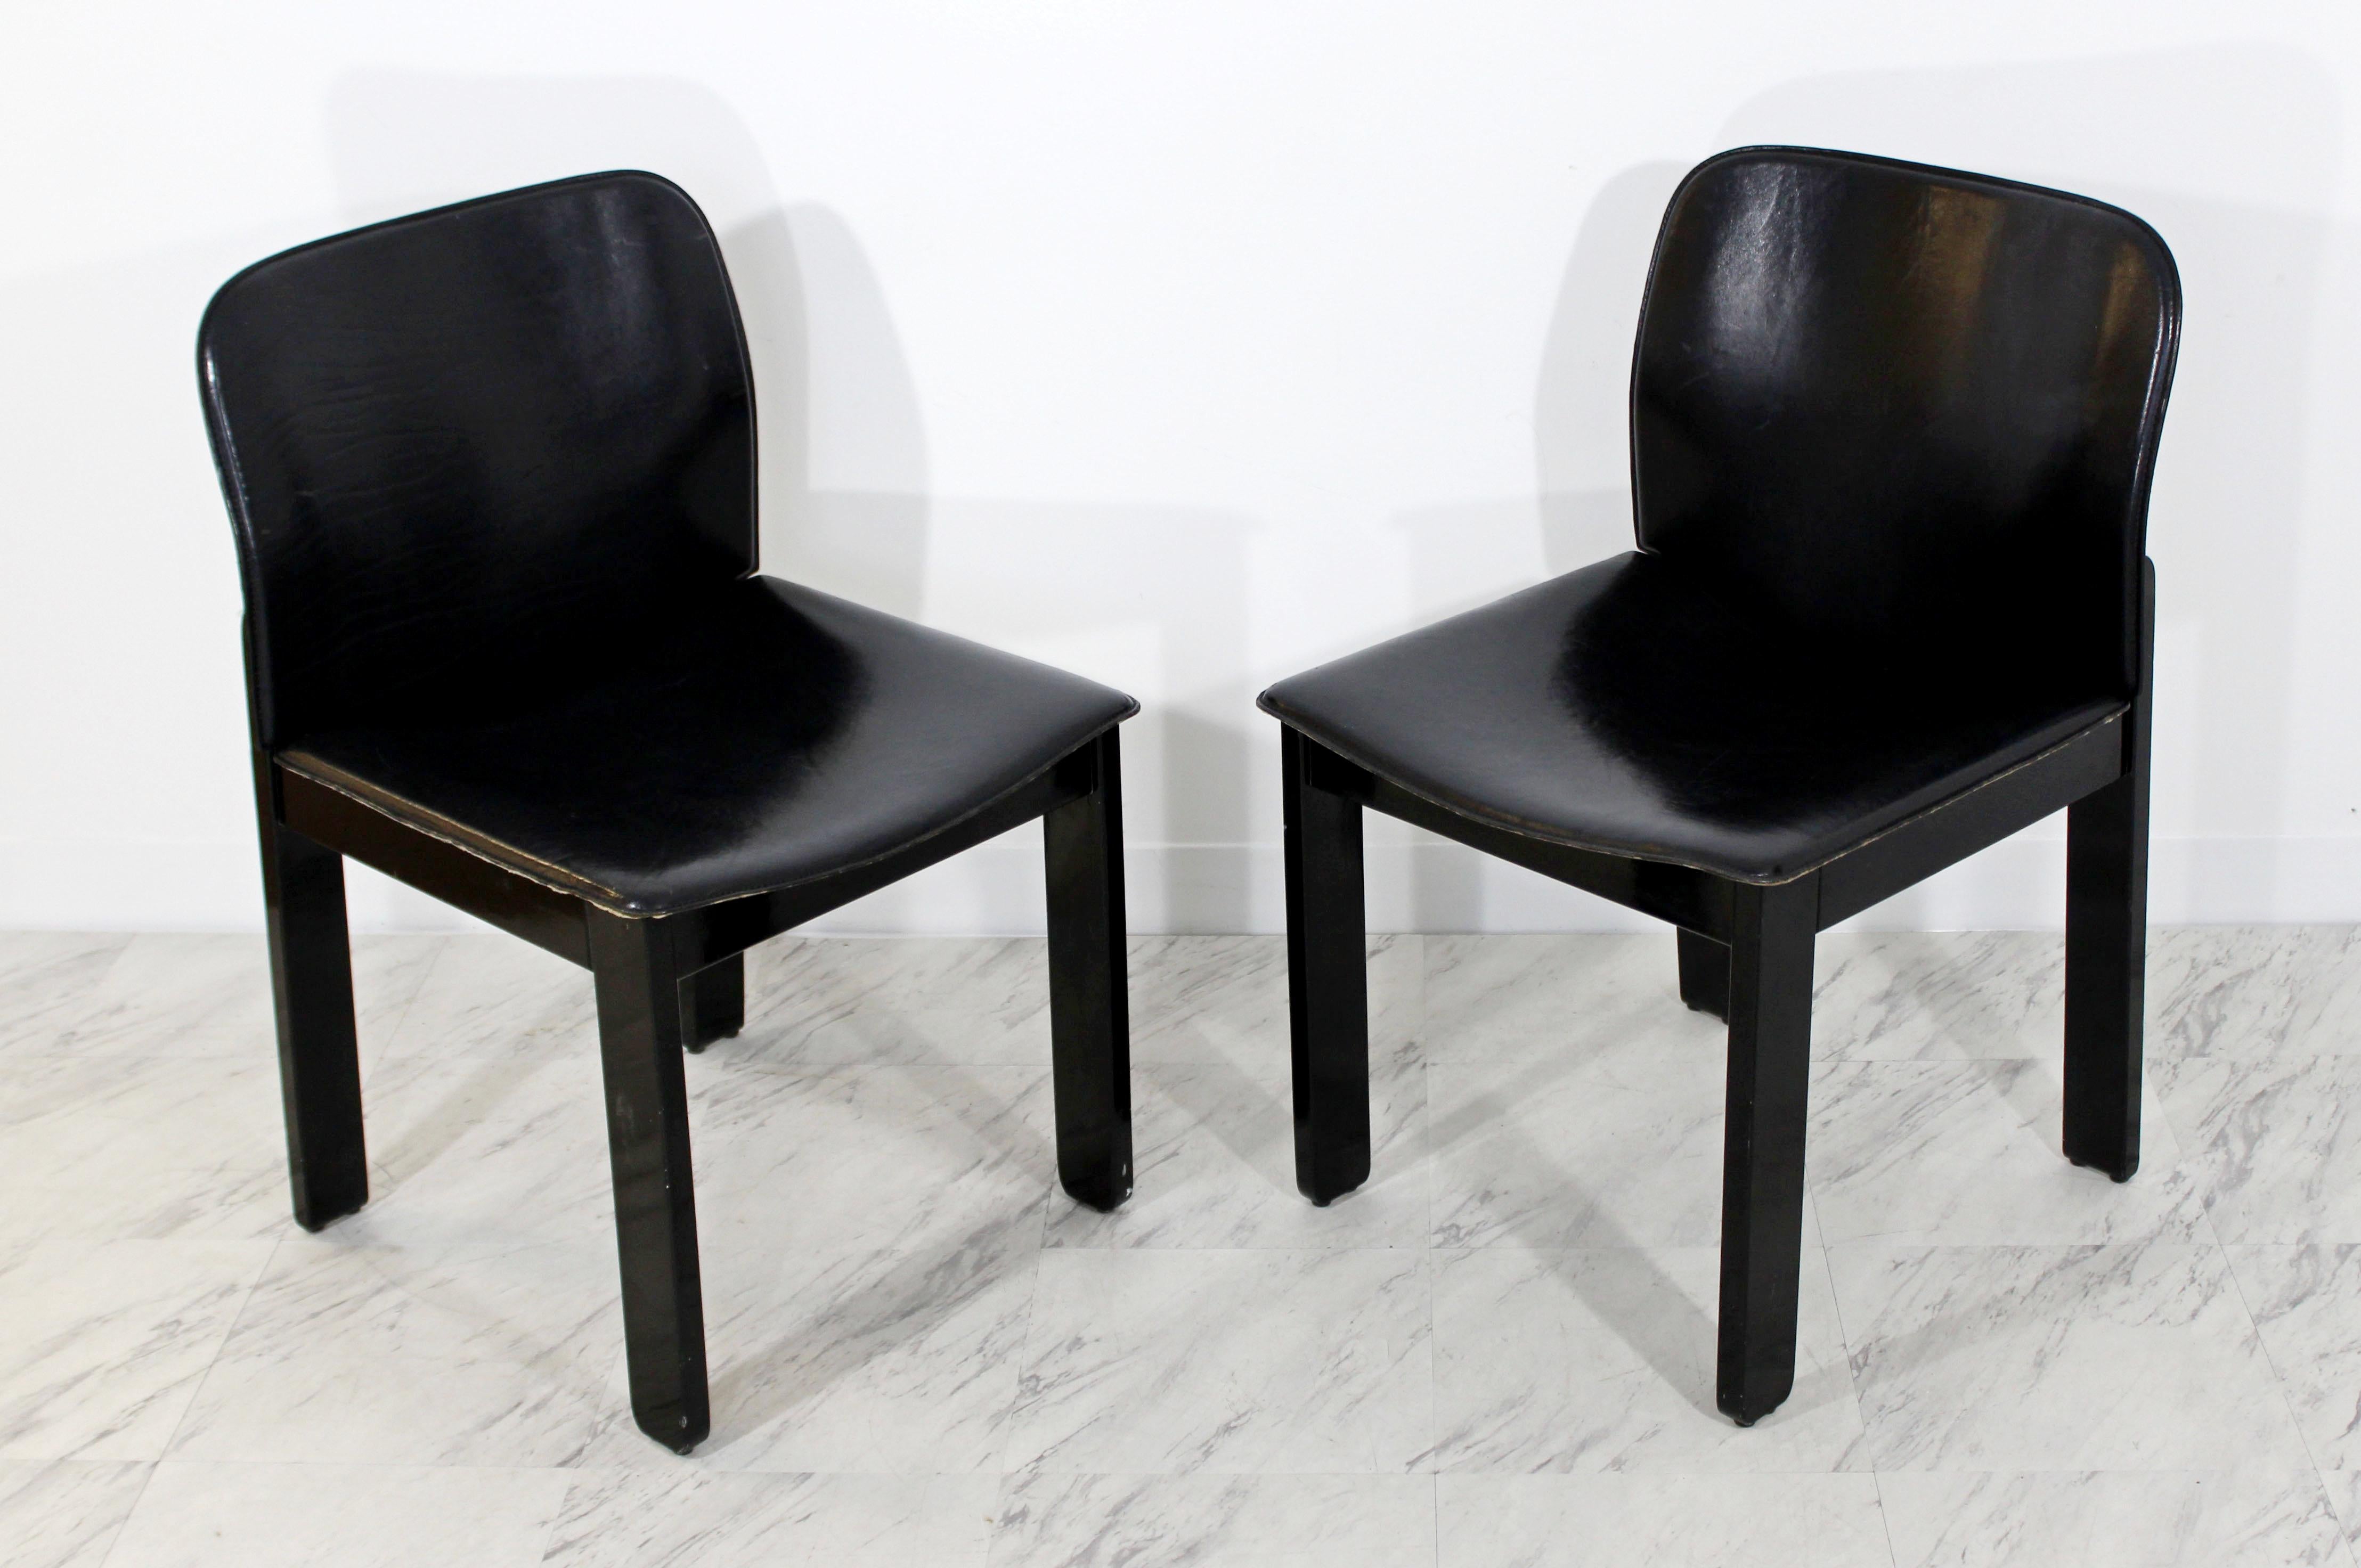 For your consideration is a remarkable pair of side chairs, made of black leather and wood, attributed to B&B Italia, circa 1970s. In very good condition. The dimensions are 20